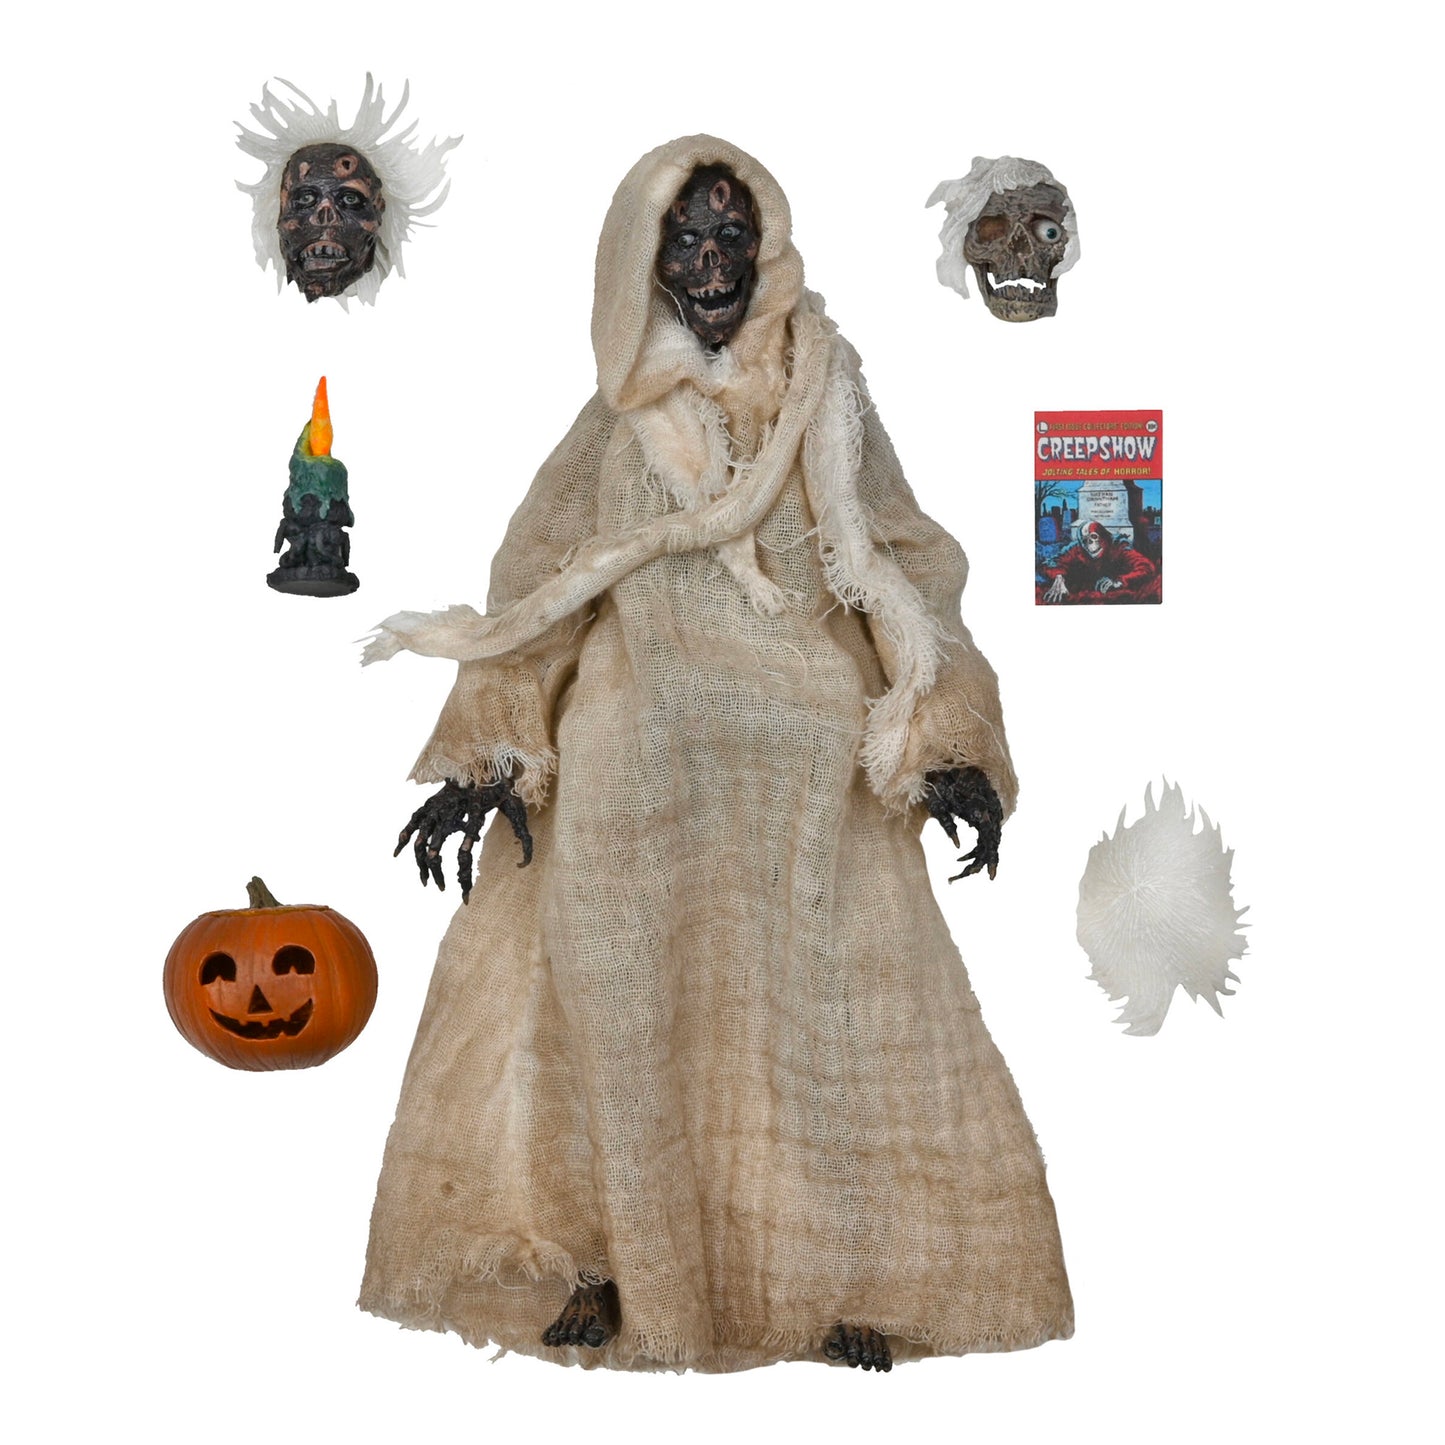 NECA: The Creepshow - The Creep Ultimate 40th Anniversary 7" Tall Action Figure